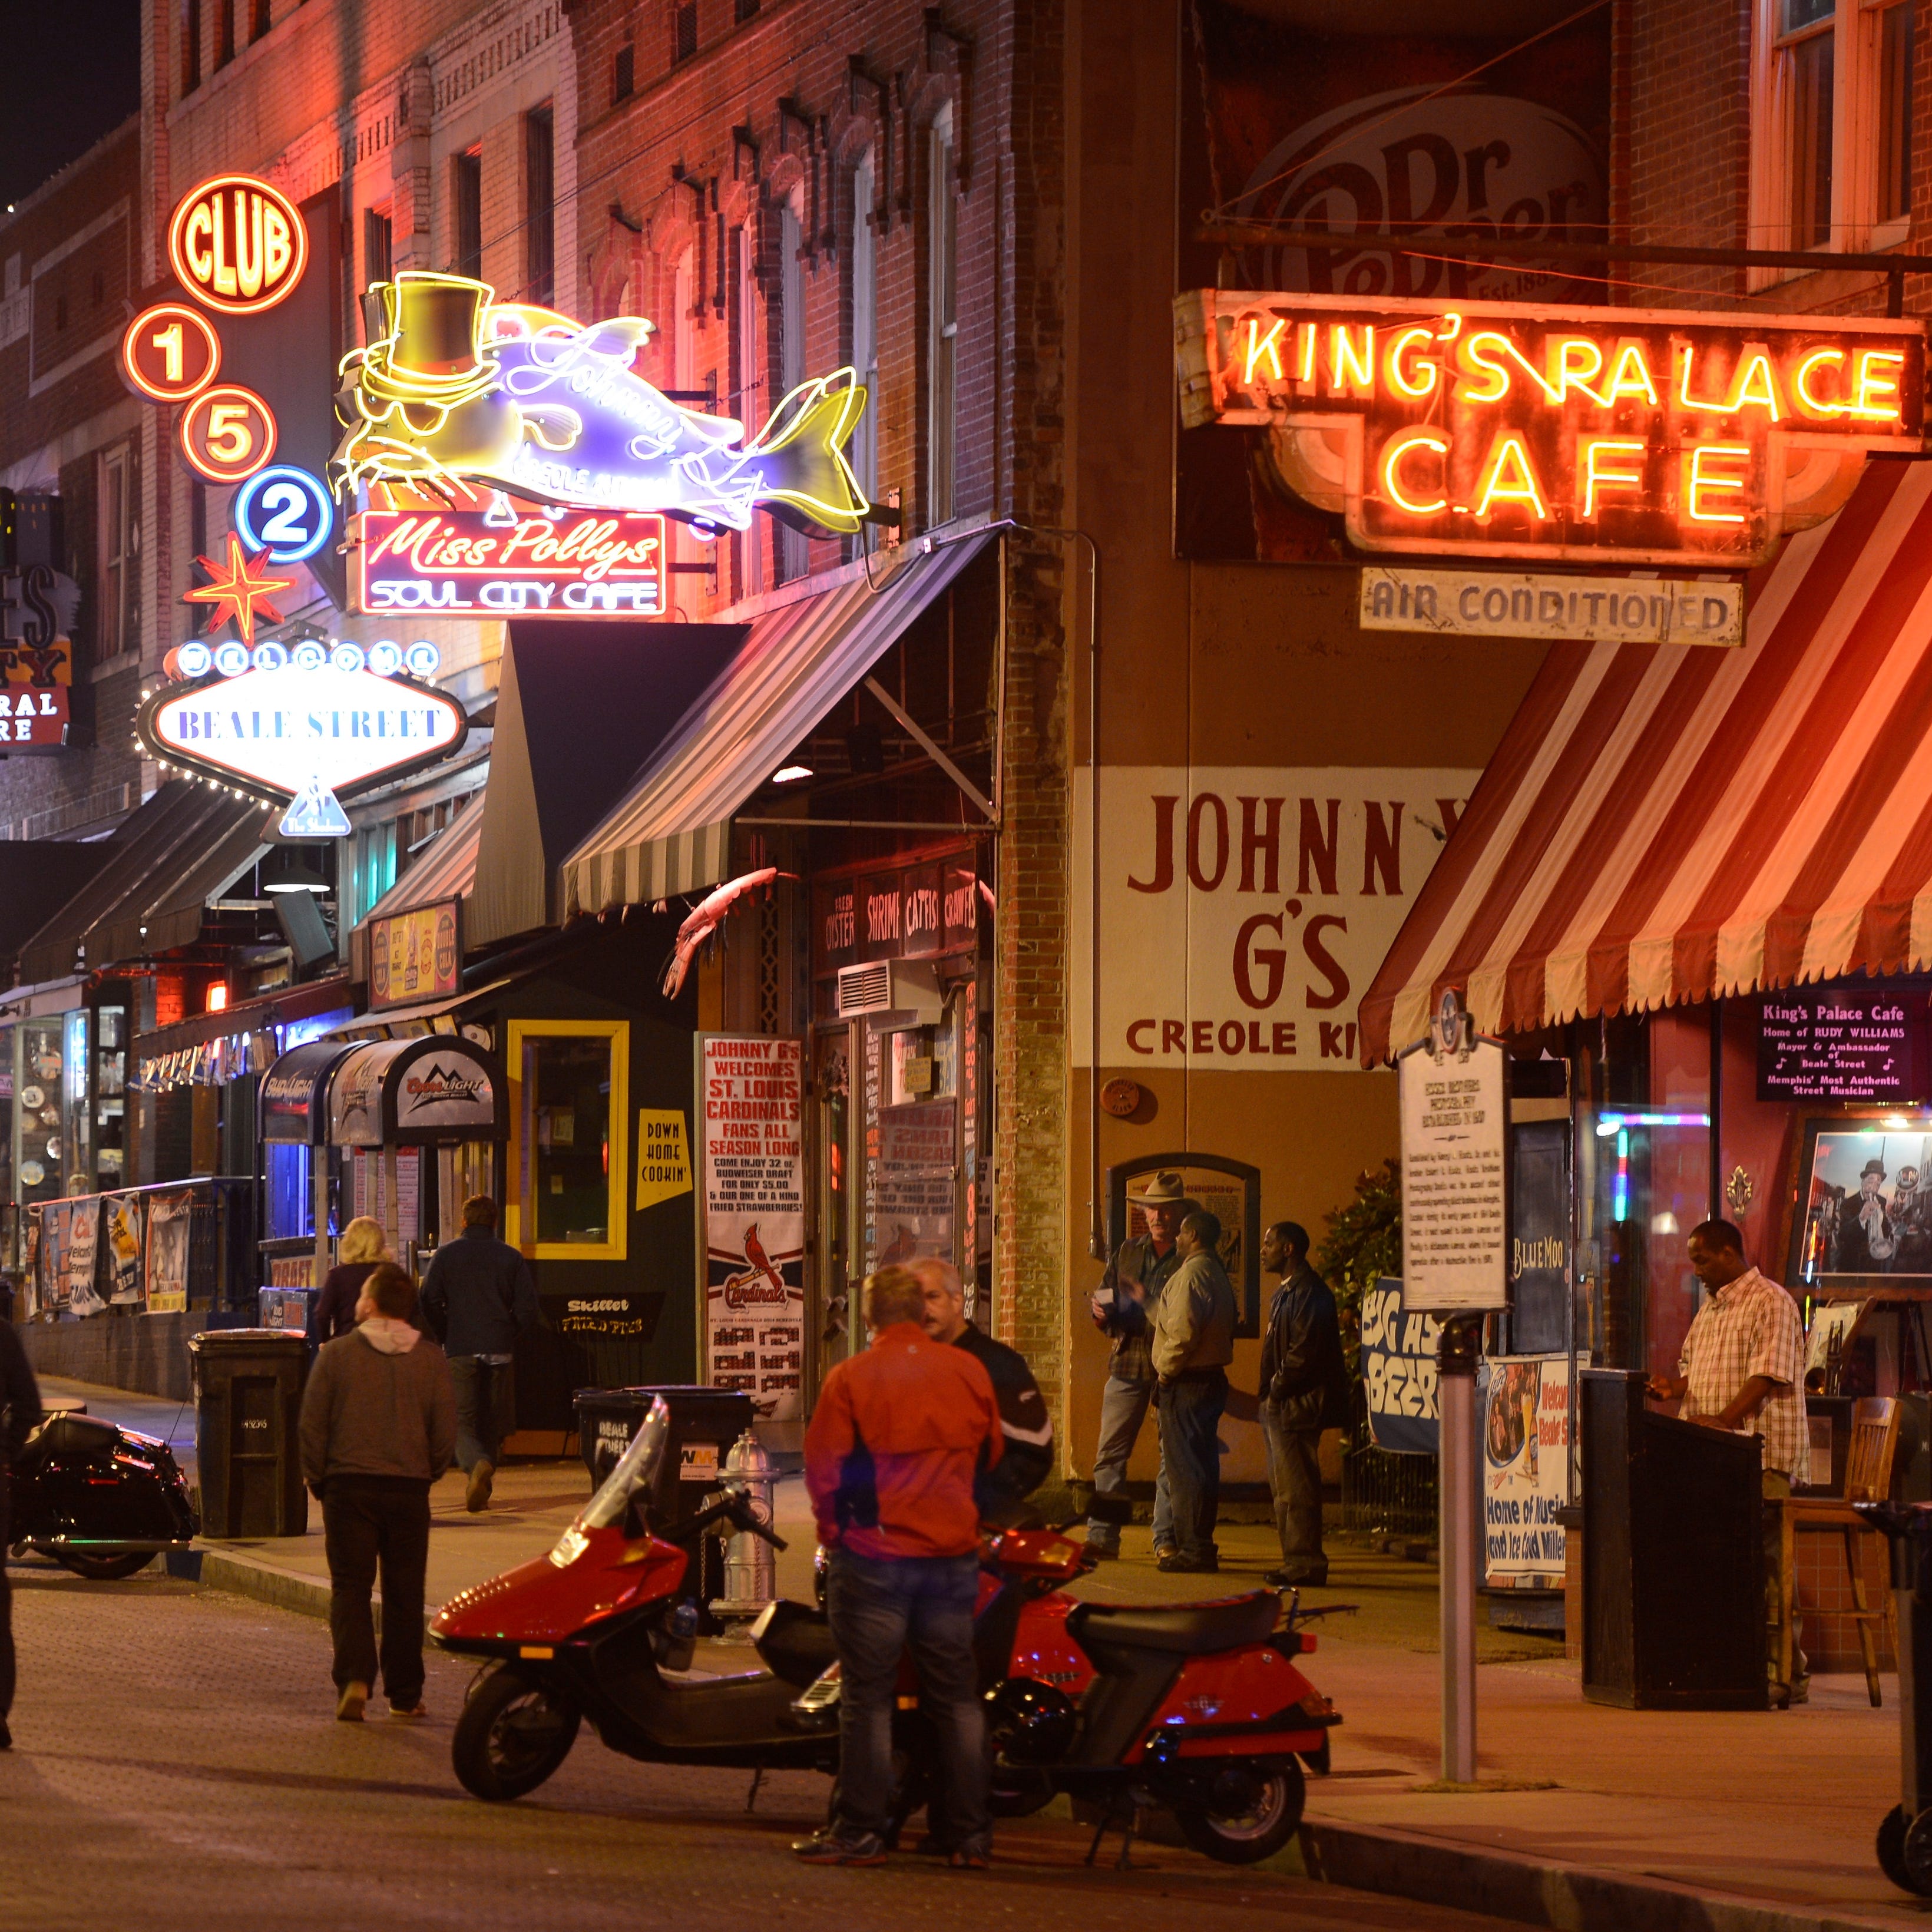 Beale Street in downtown Memphis, Tennessee.